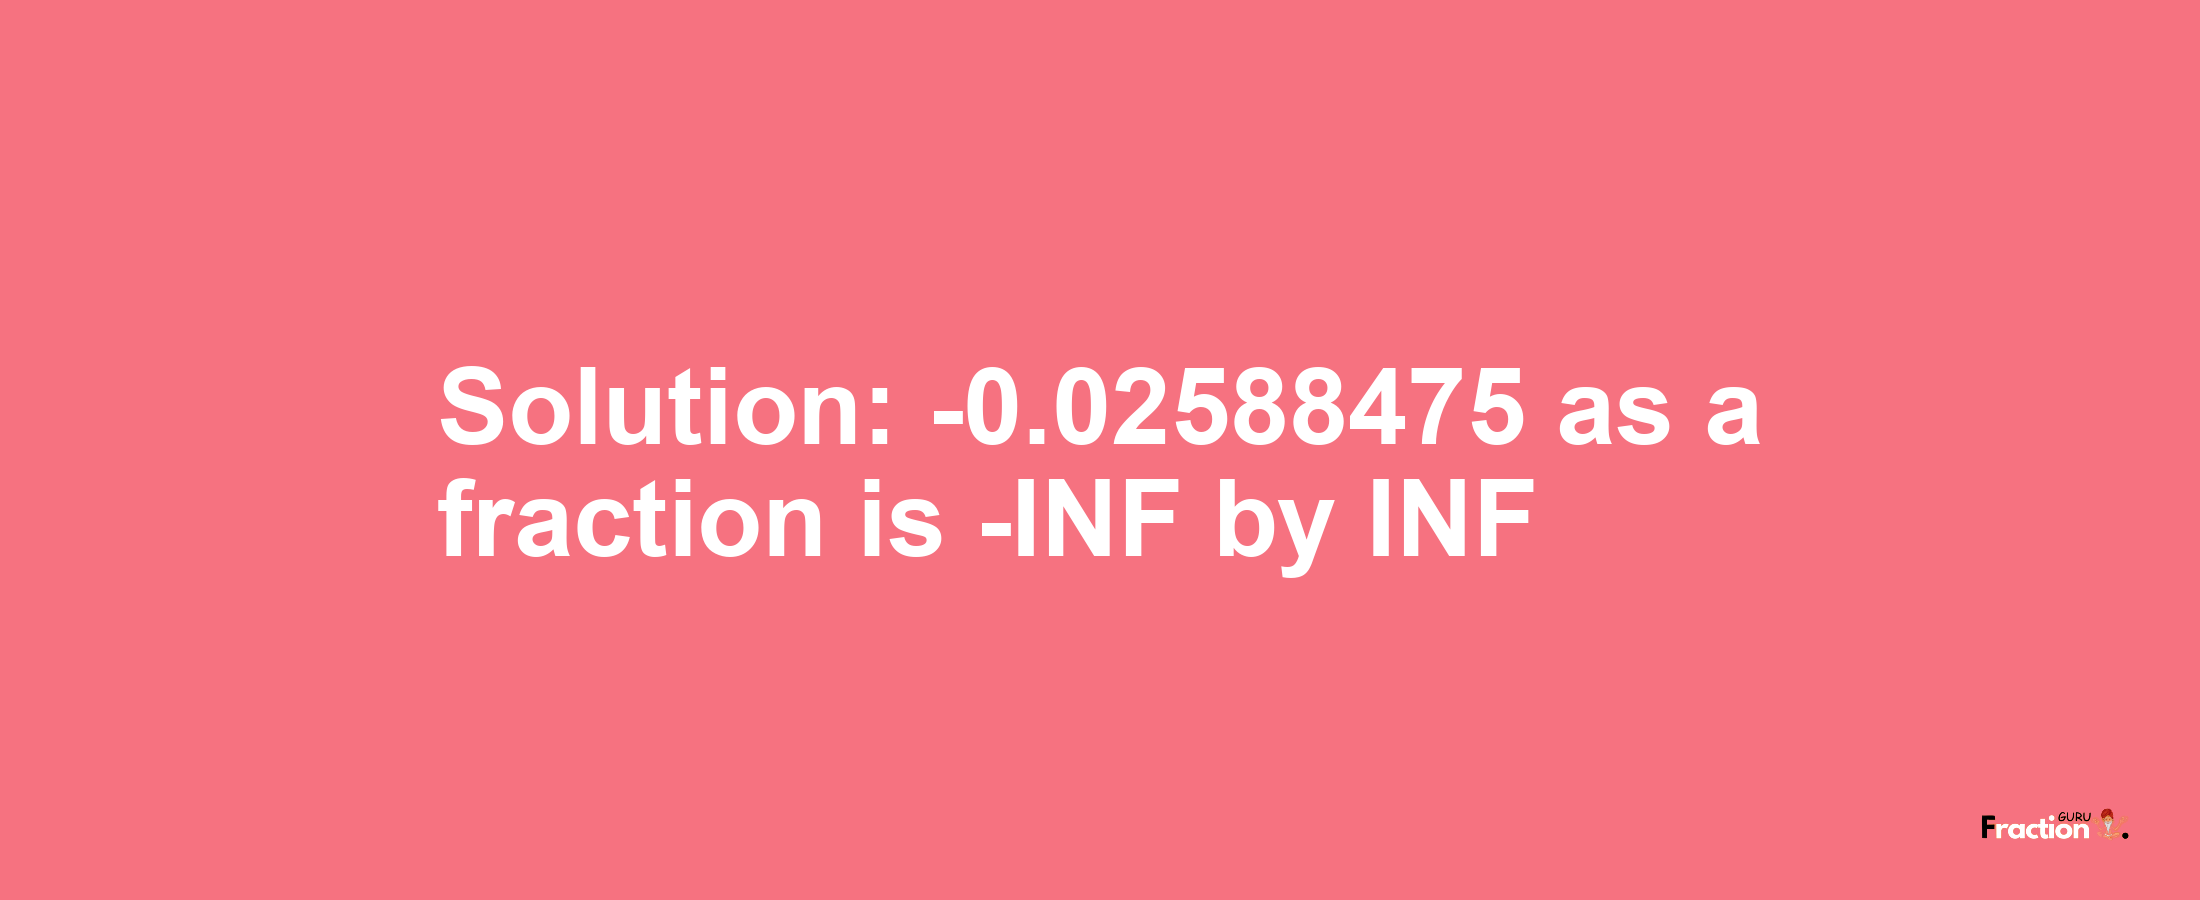 Solution:-0.02588475 as a fraction is -INF/INF